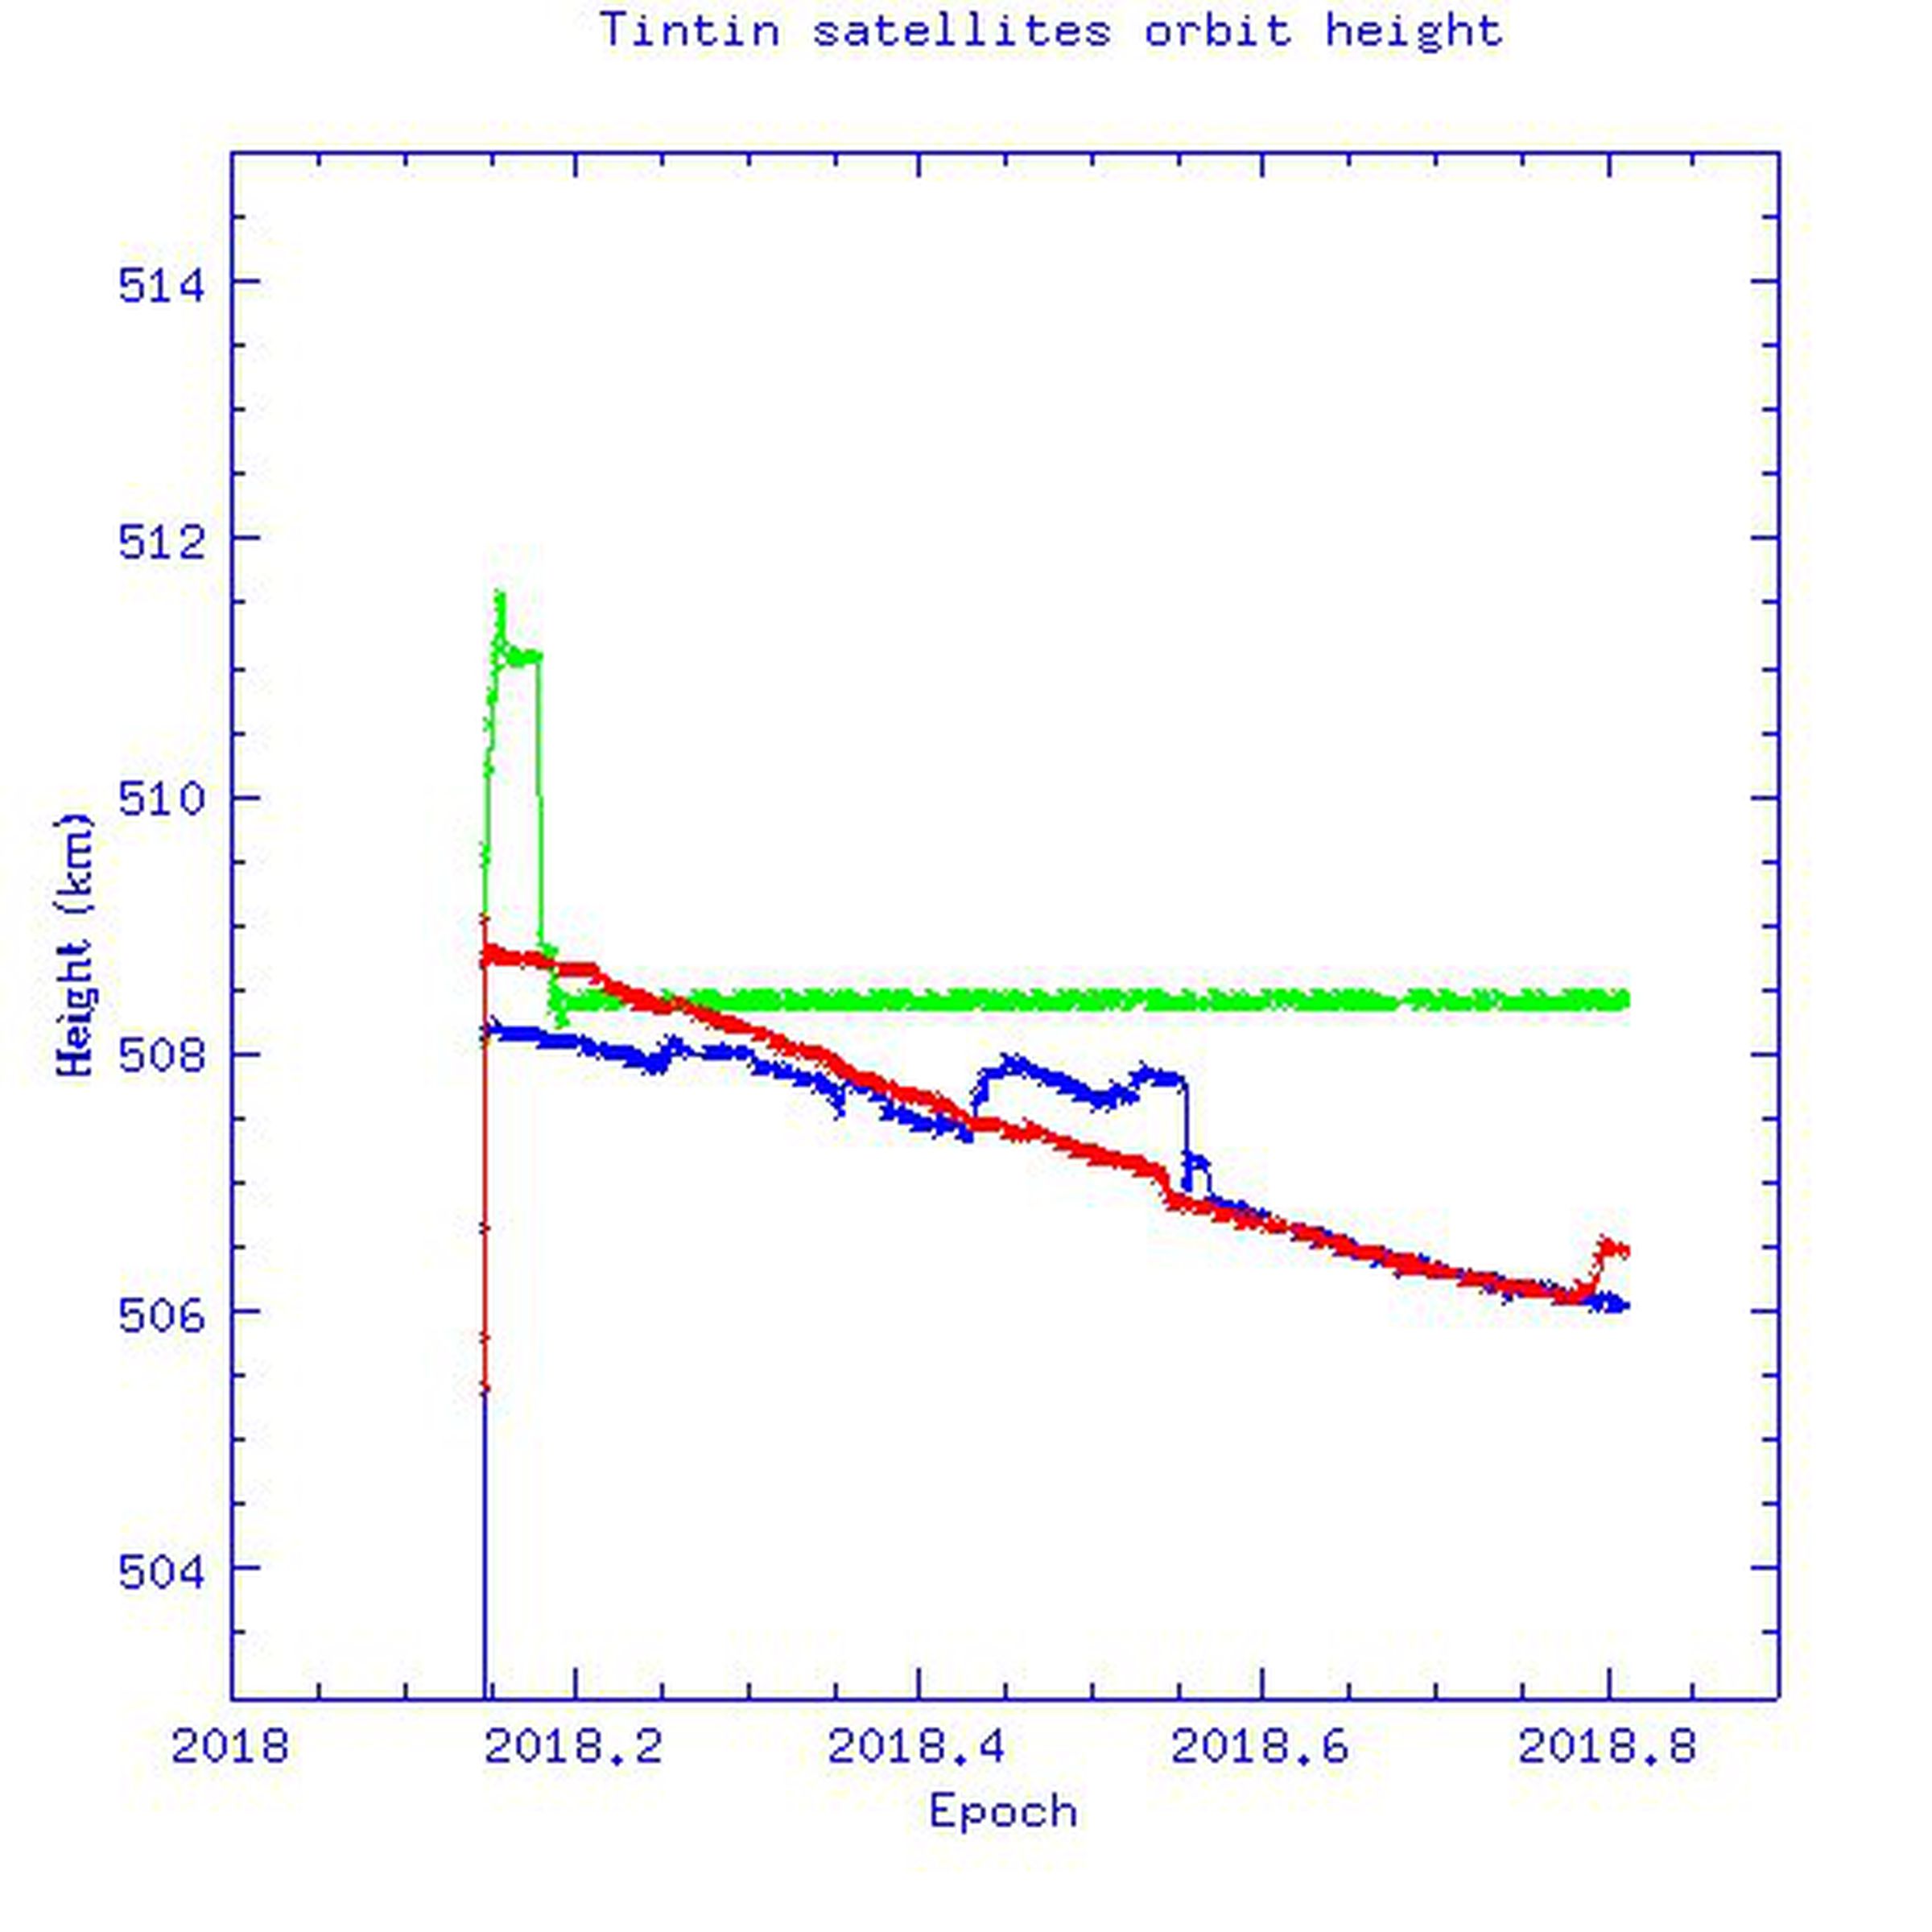 This graph, compiled by Jonathan McDowell using data from Space_Track.org, shows the orbital altitudes of TinTin A (red), TinTin B (blue), and the PAZ satellite (green), which launched with the Starlink test satellites. Apart from some slight maneuvering, the satellites did not raise their orbits significantly as originally planned.